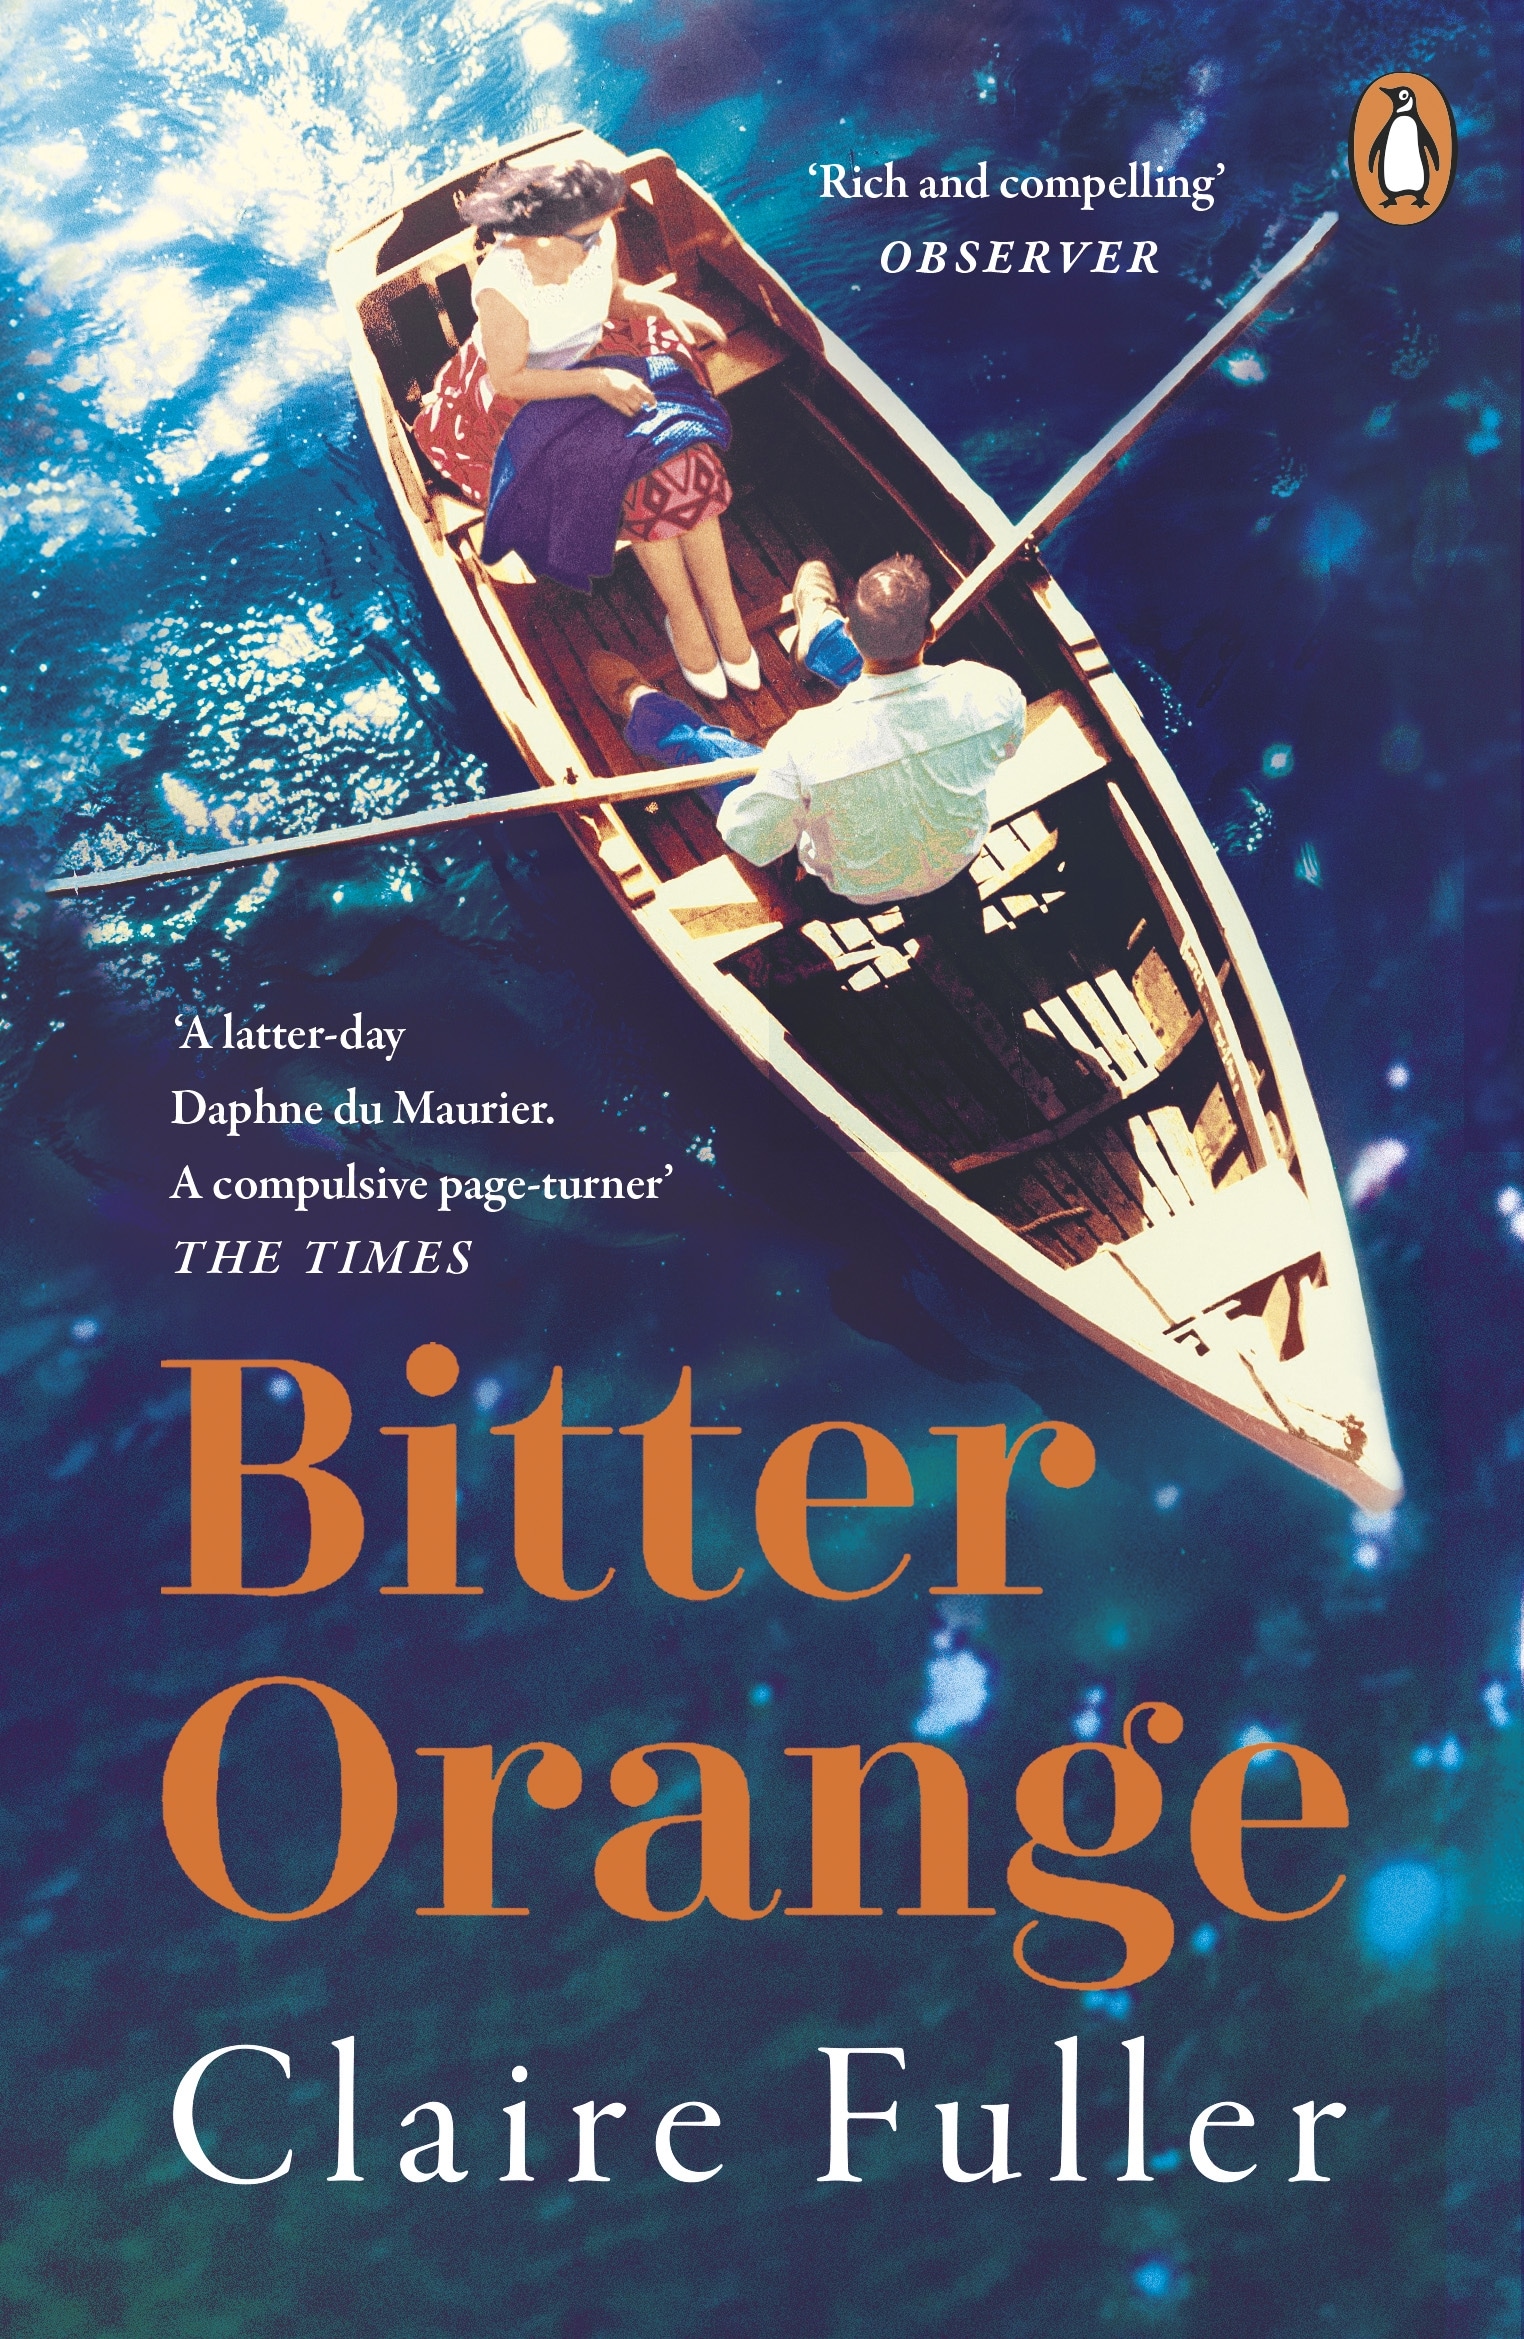 Book “Bitter Orange” by Claire Fuller — May 2, 2019